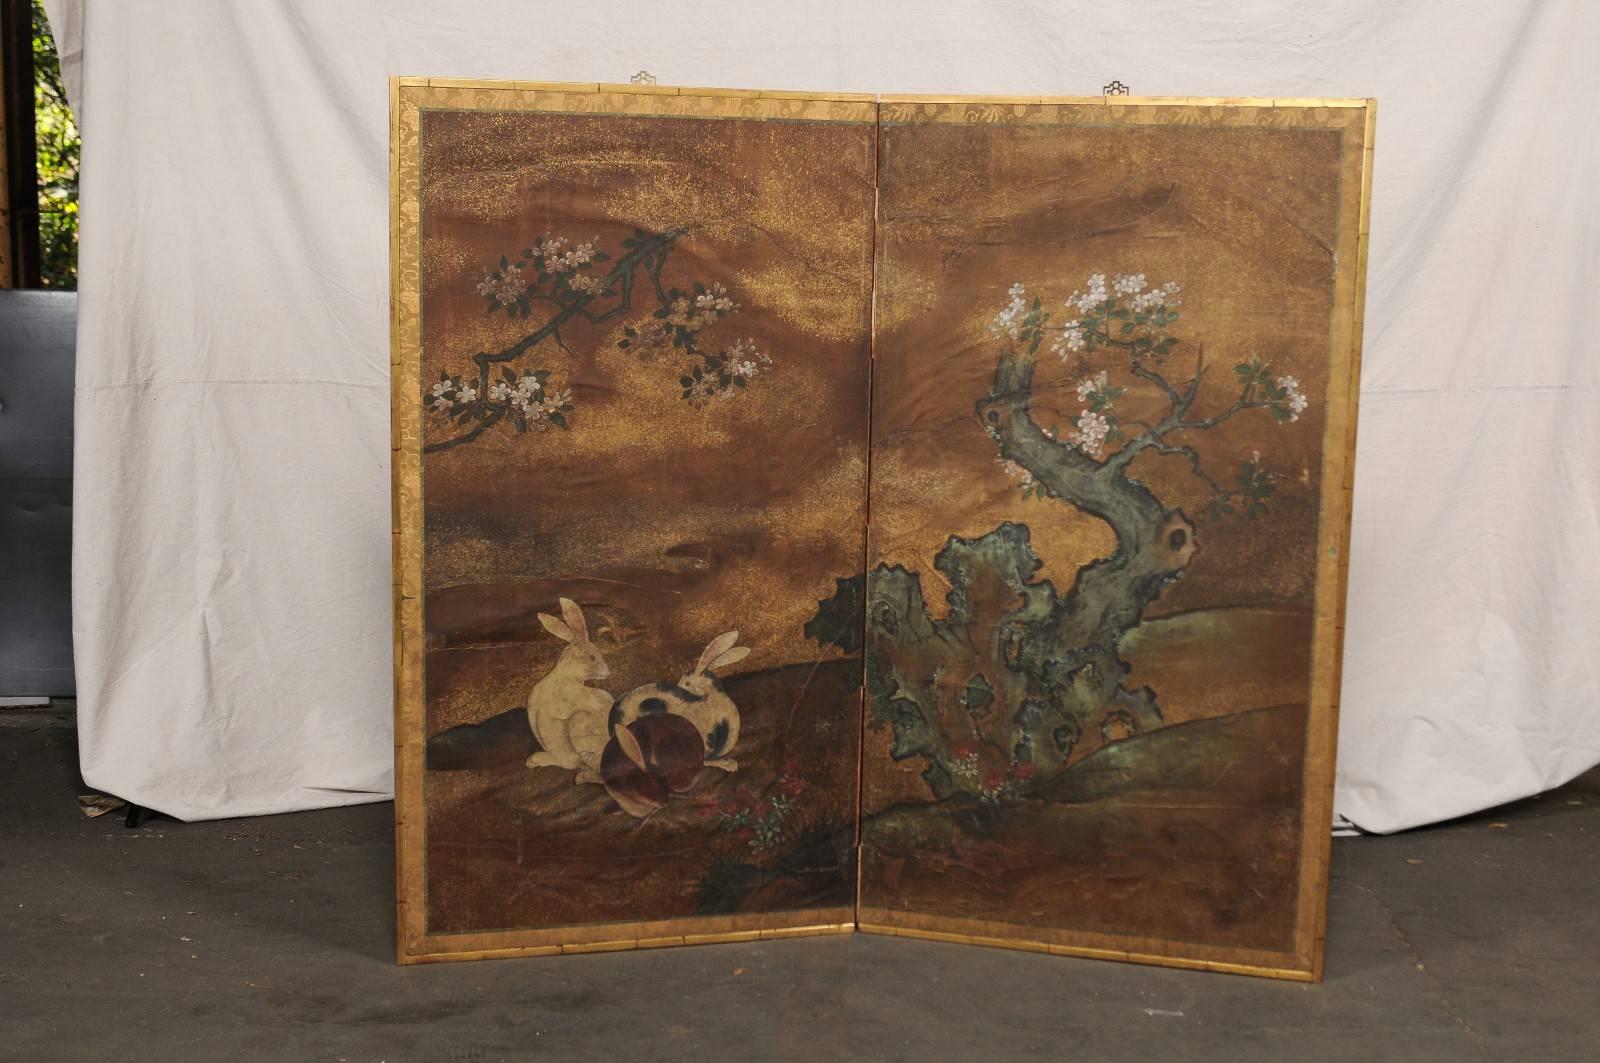 18th-19th century Japanese two-panel paper screen with rabbits.